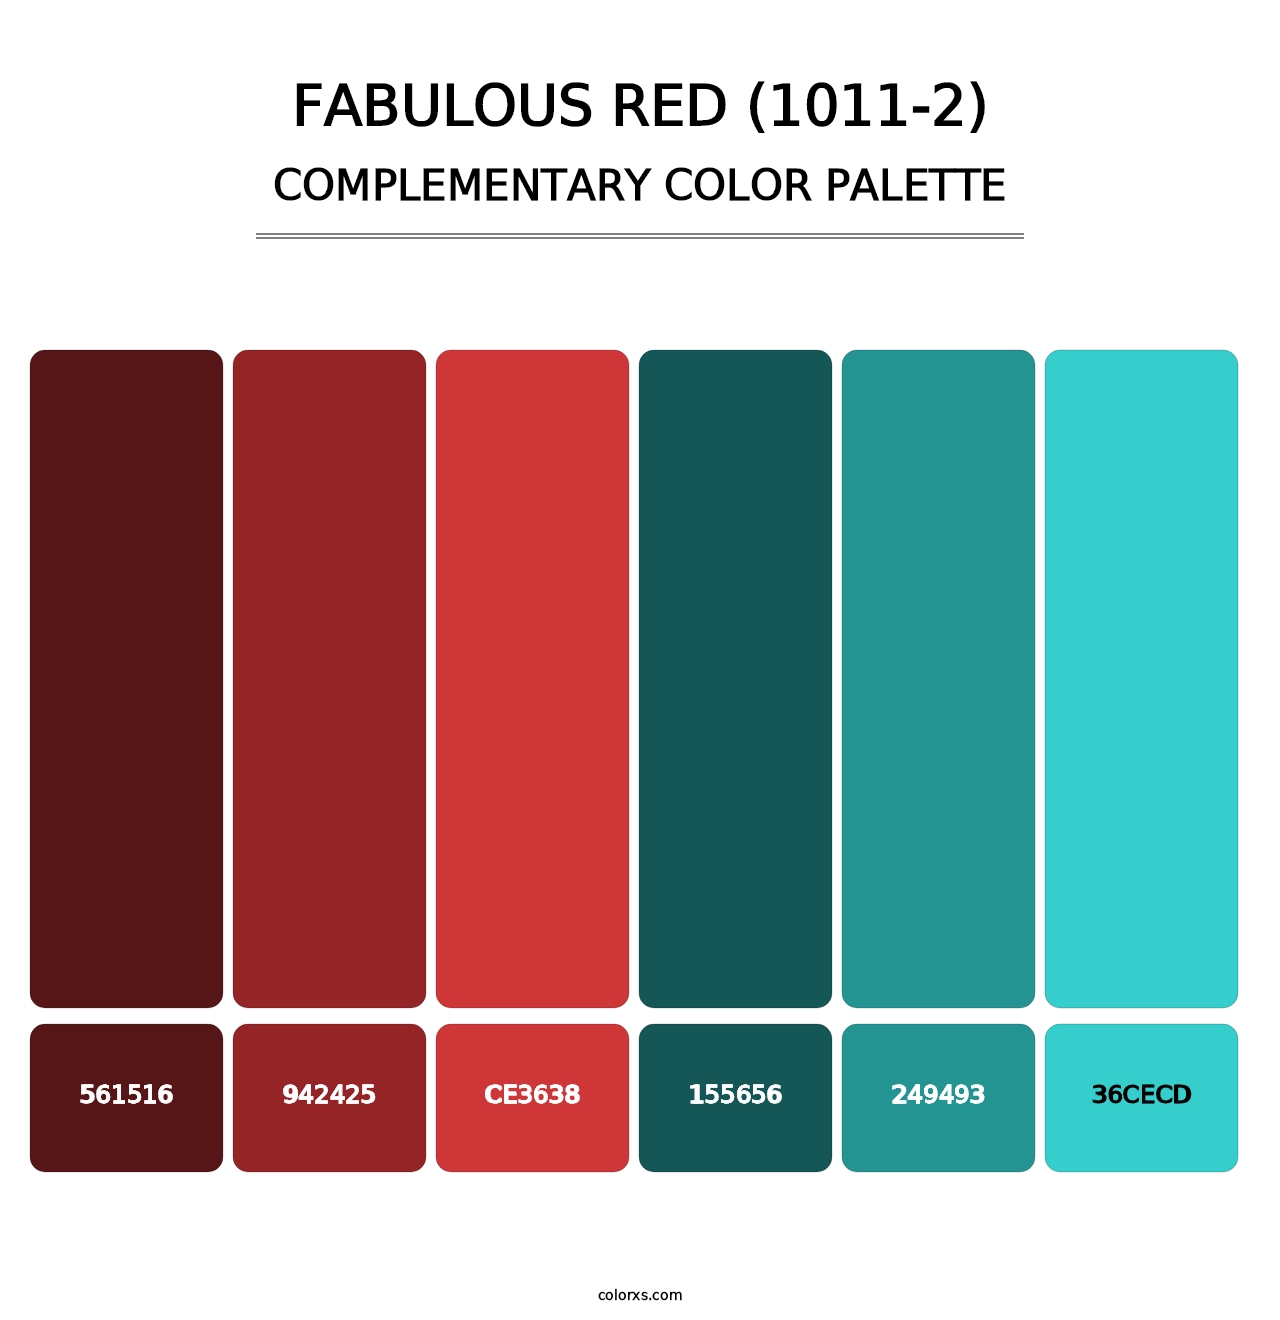 Fabulous Red (1011-2) - Complementary Color Palette